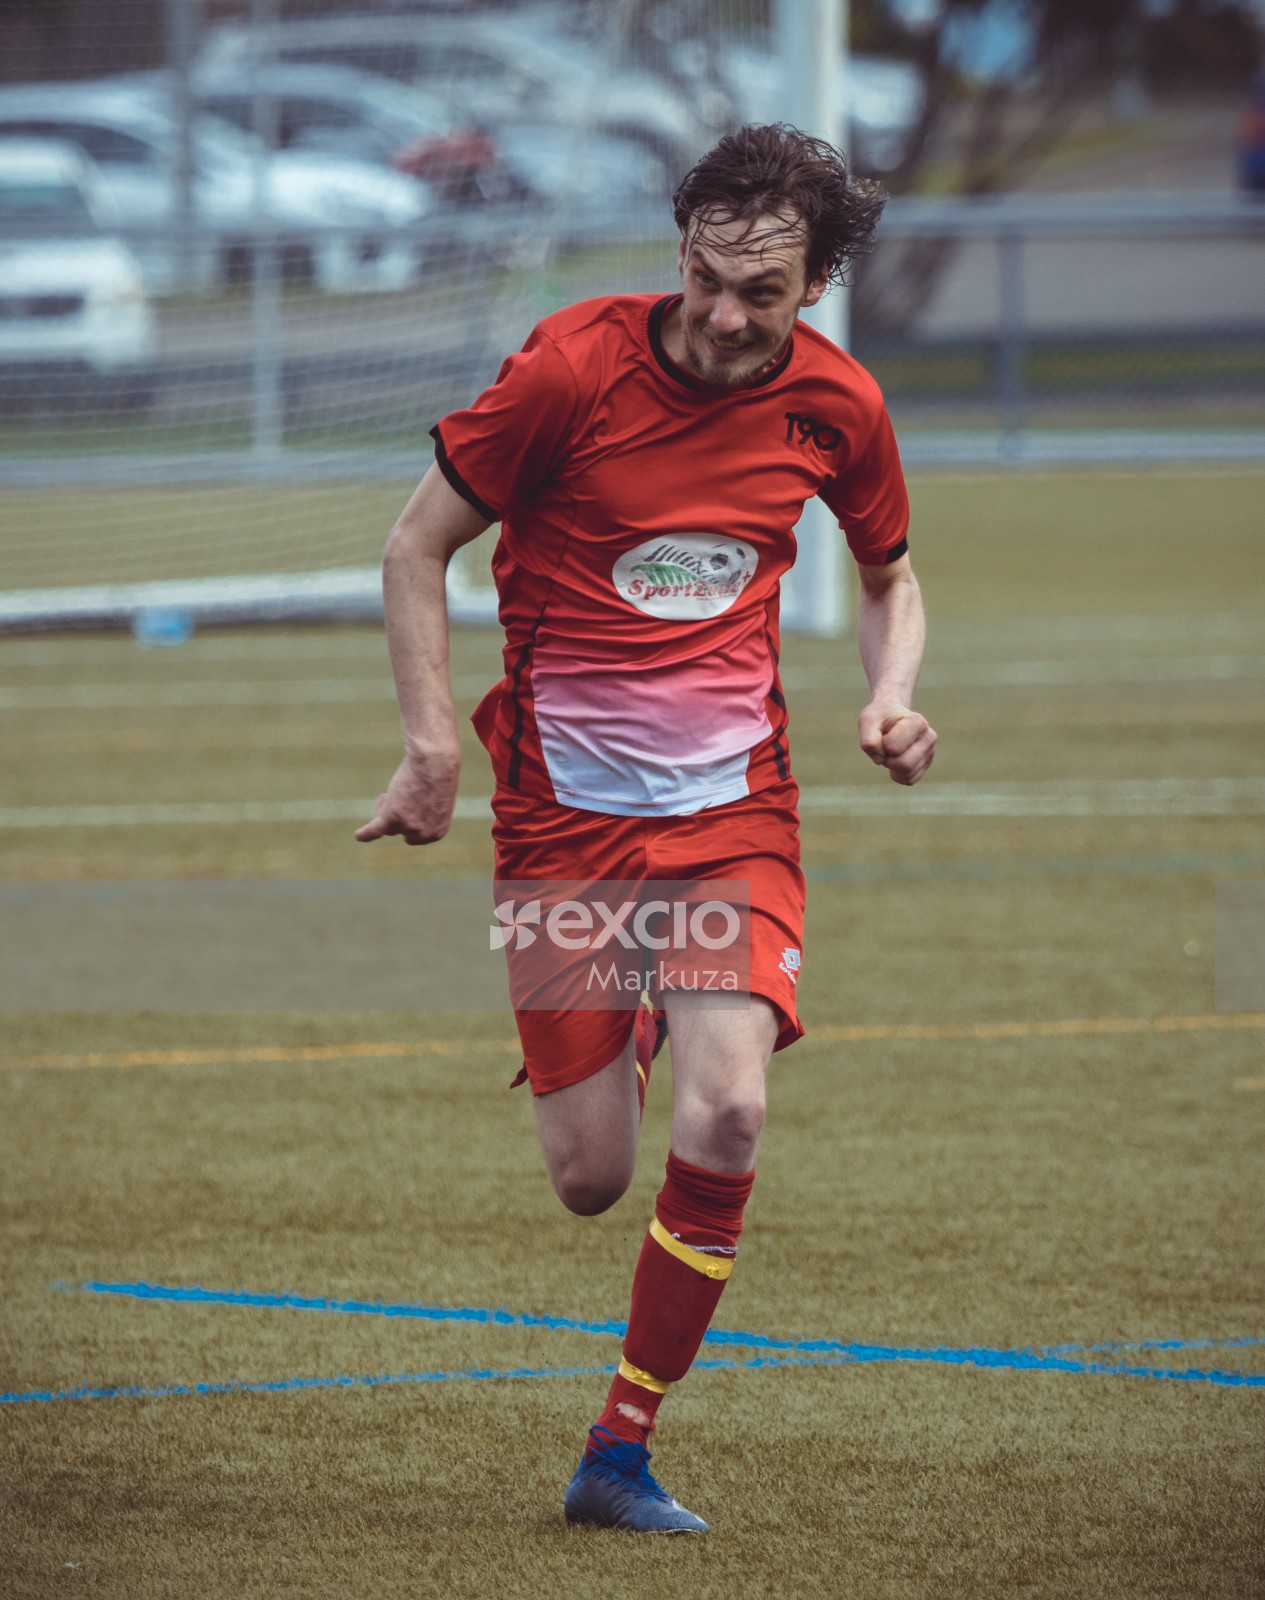 Player in a red kit dashing on the football field - Sports Zone sunday league